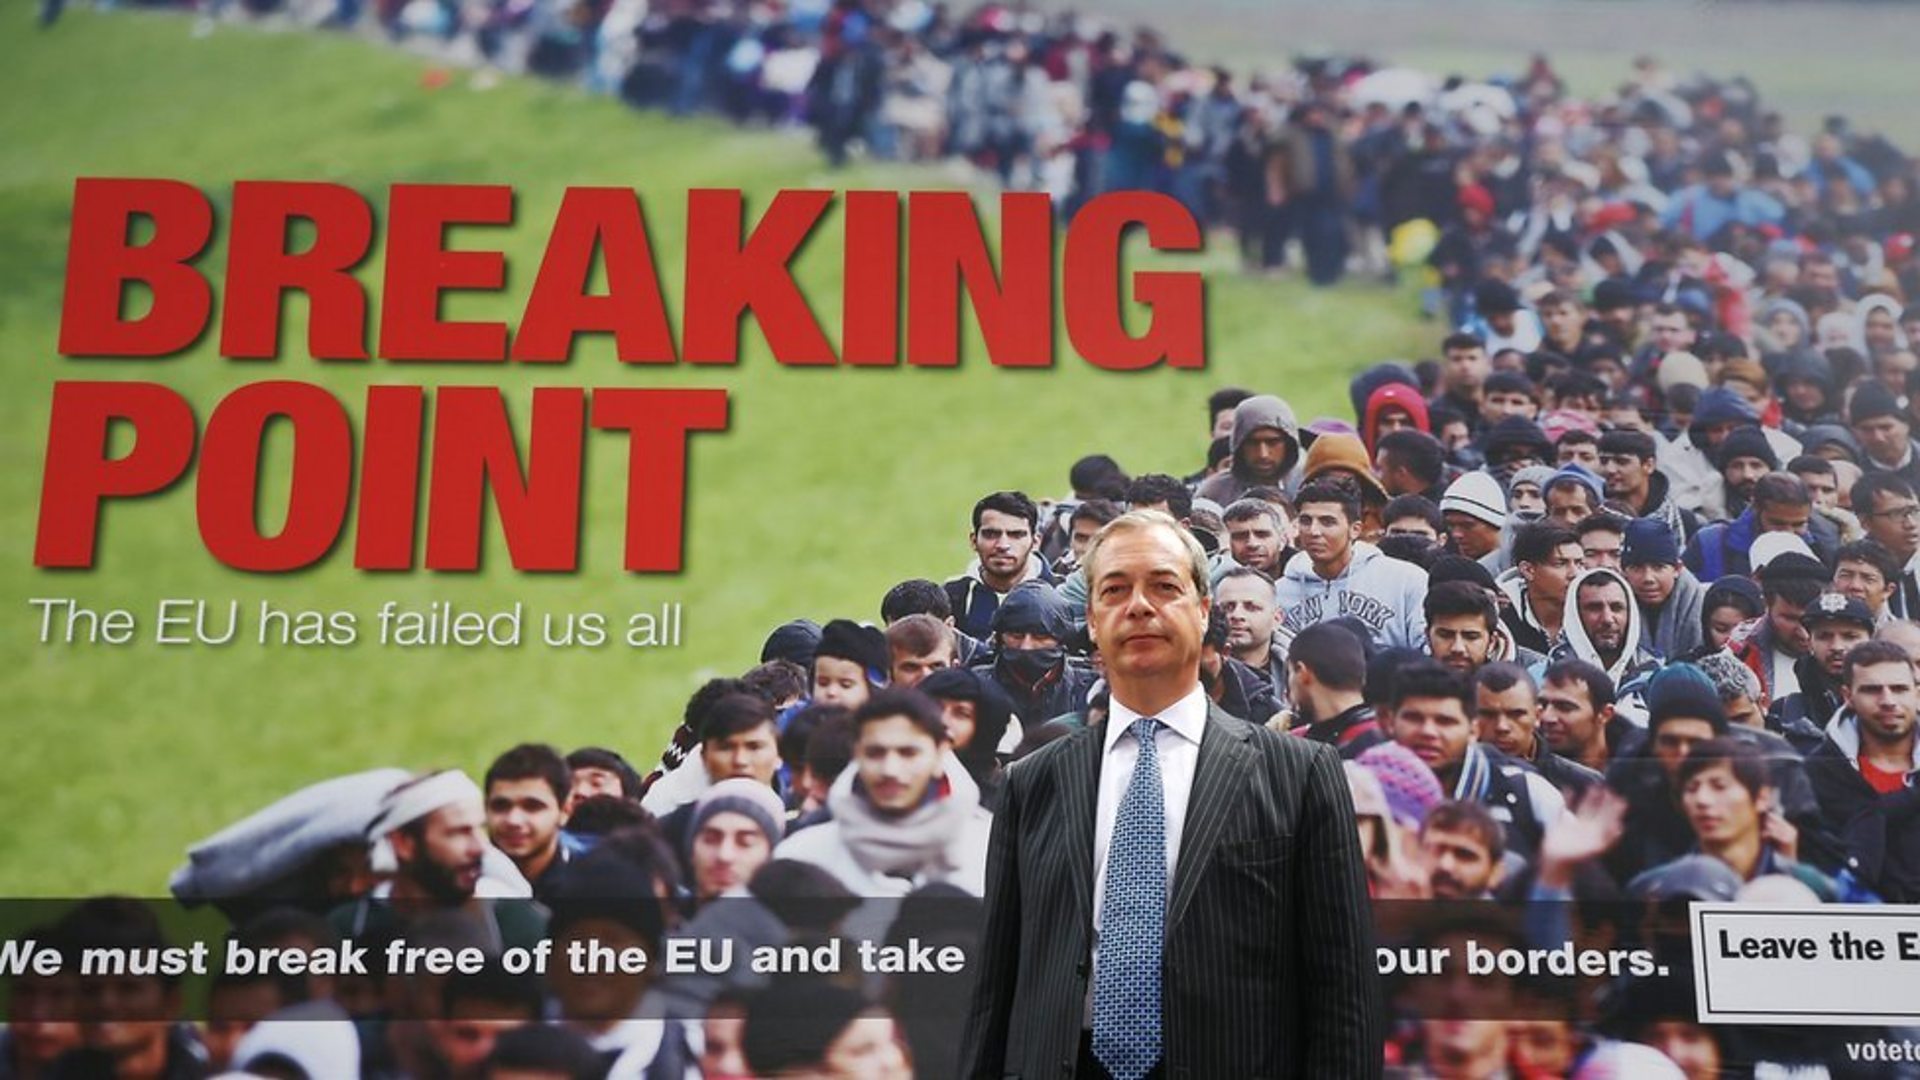 Ukip's infamous "breaking point" poster in 2016 (BBC)